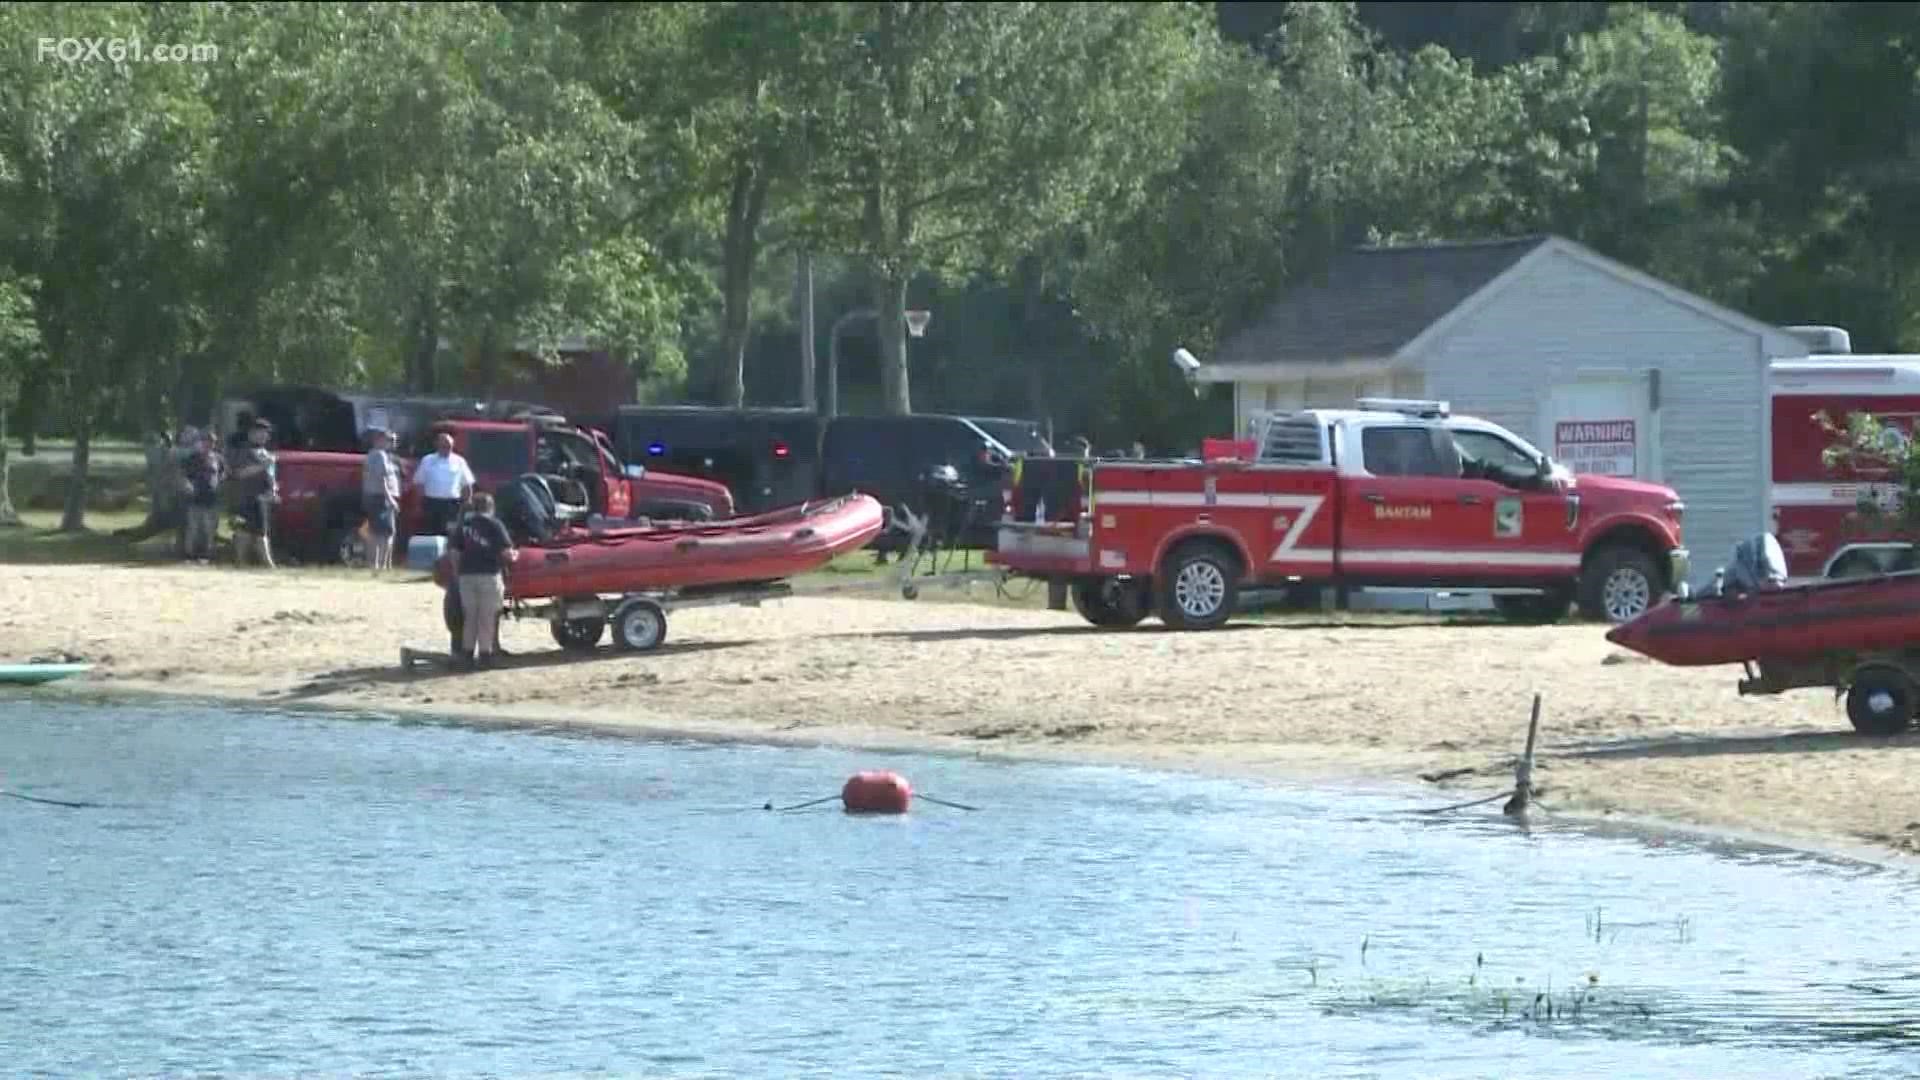 The body of a missing teen was found at a Cheshire pond Monday evening. His body was located close to the area where they were focusing on, but stumbled upon it.